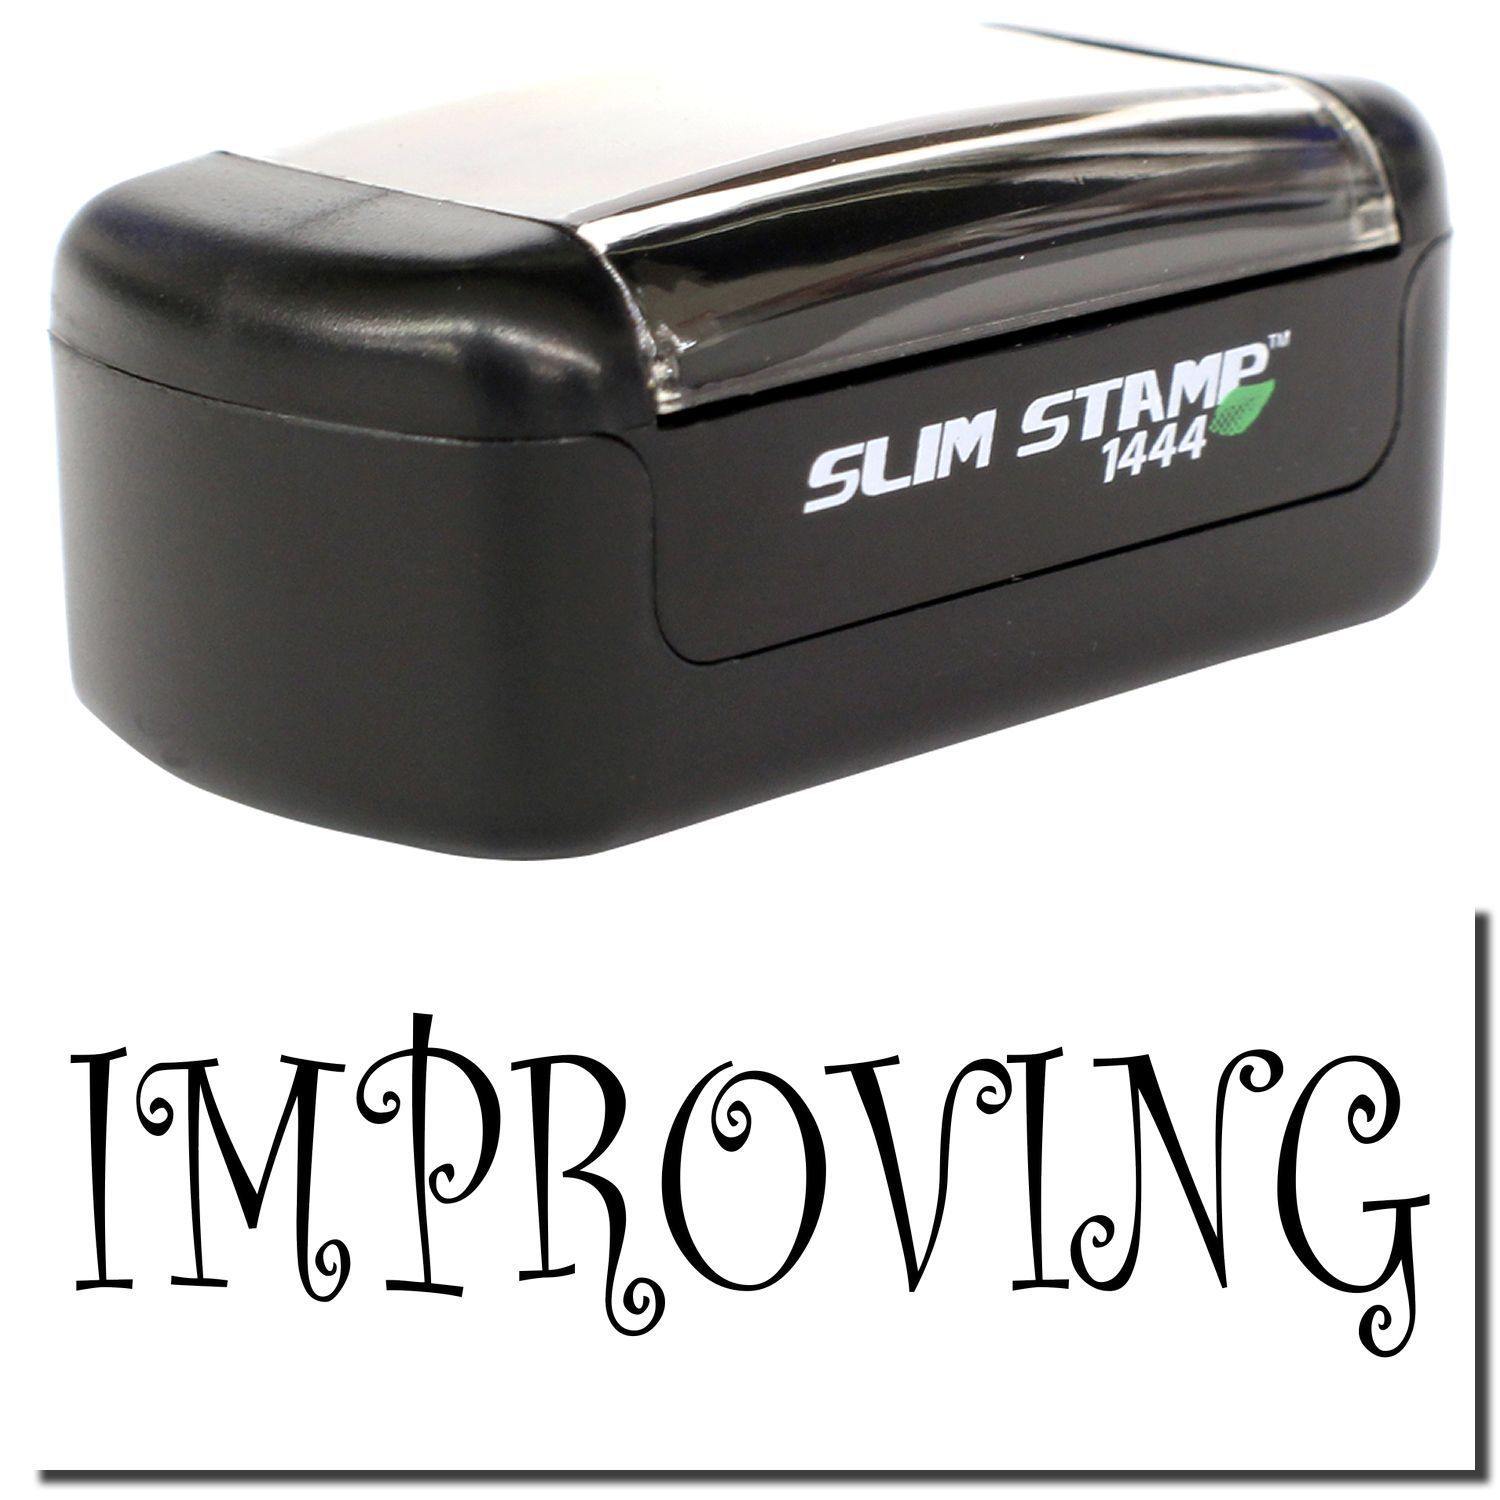 A stock office pre-inked stamp with a stamped image showing how the text "IMPROVING" is displayed after stamping.